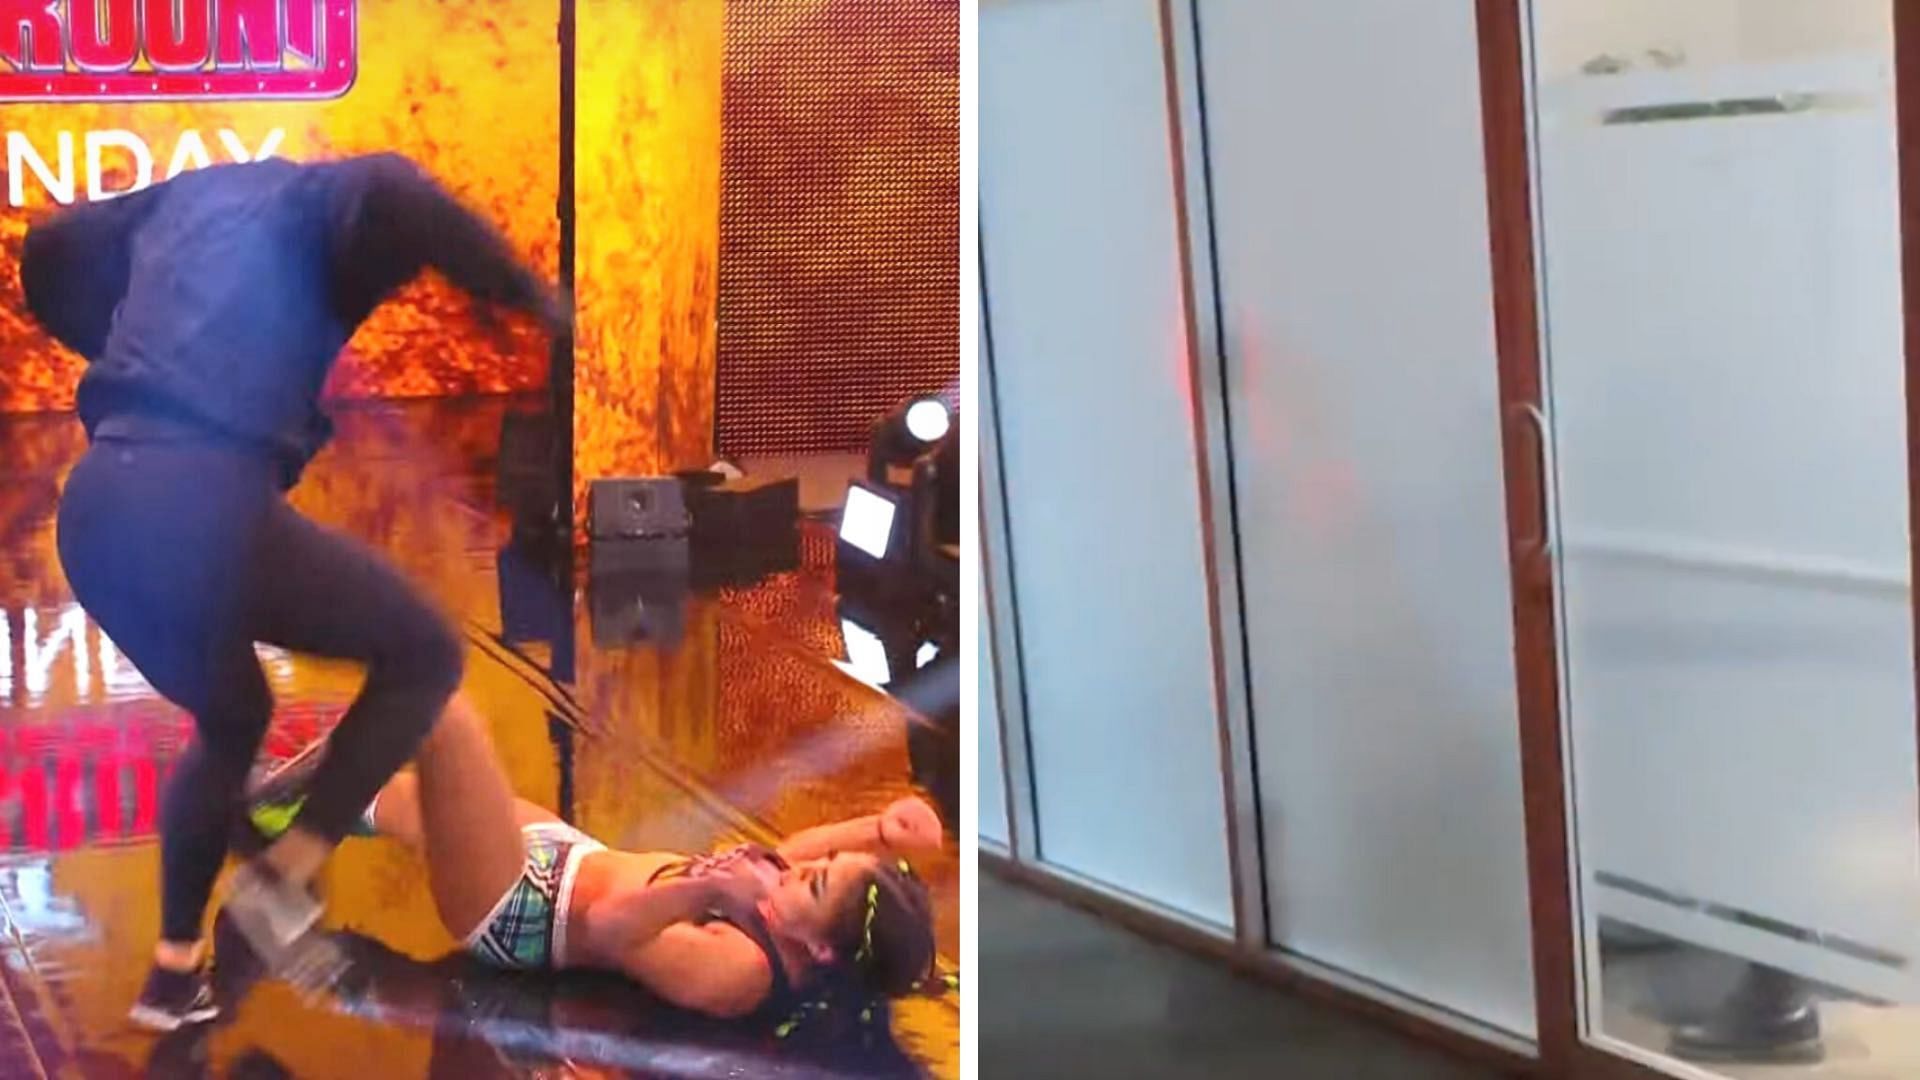 WWE NXT backstage is straight outta a horror story book